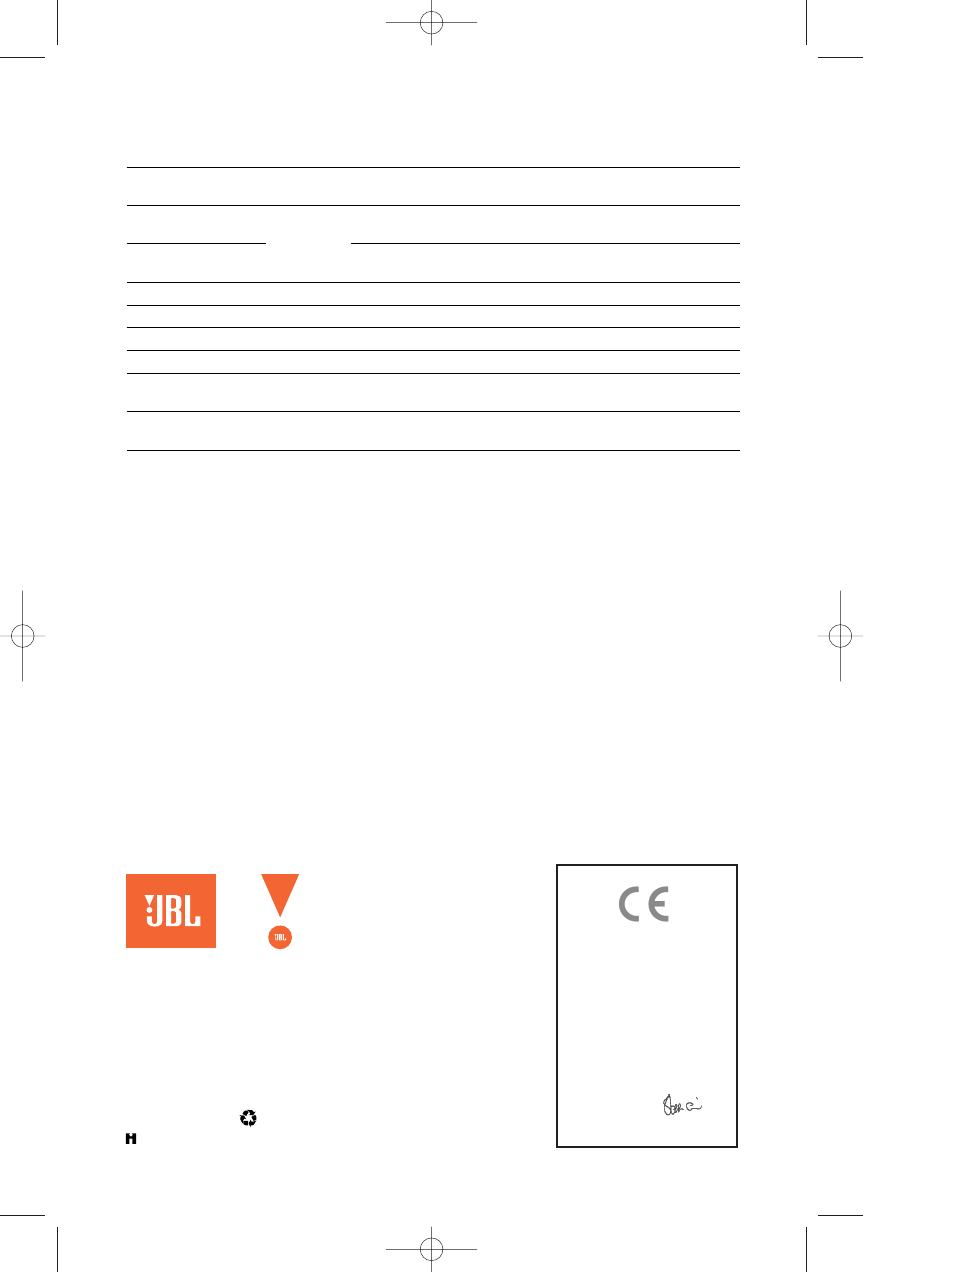 Specifications | JBL CM42 User Manual | Page 6 / 6 | Original mode